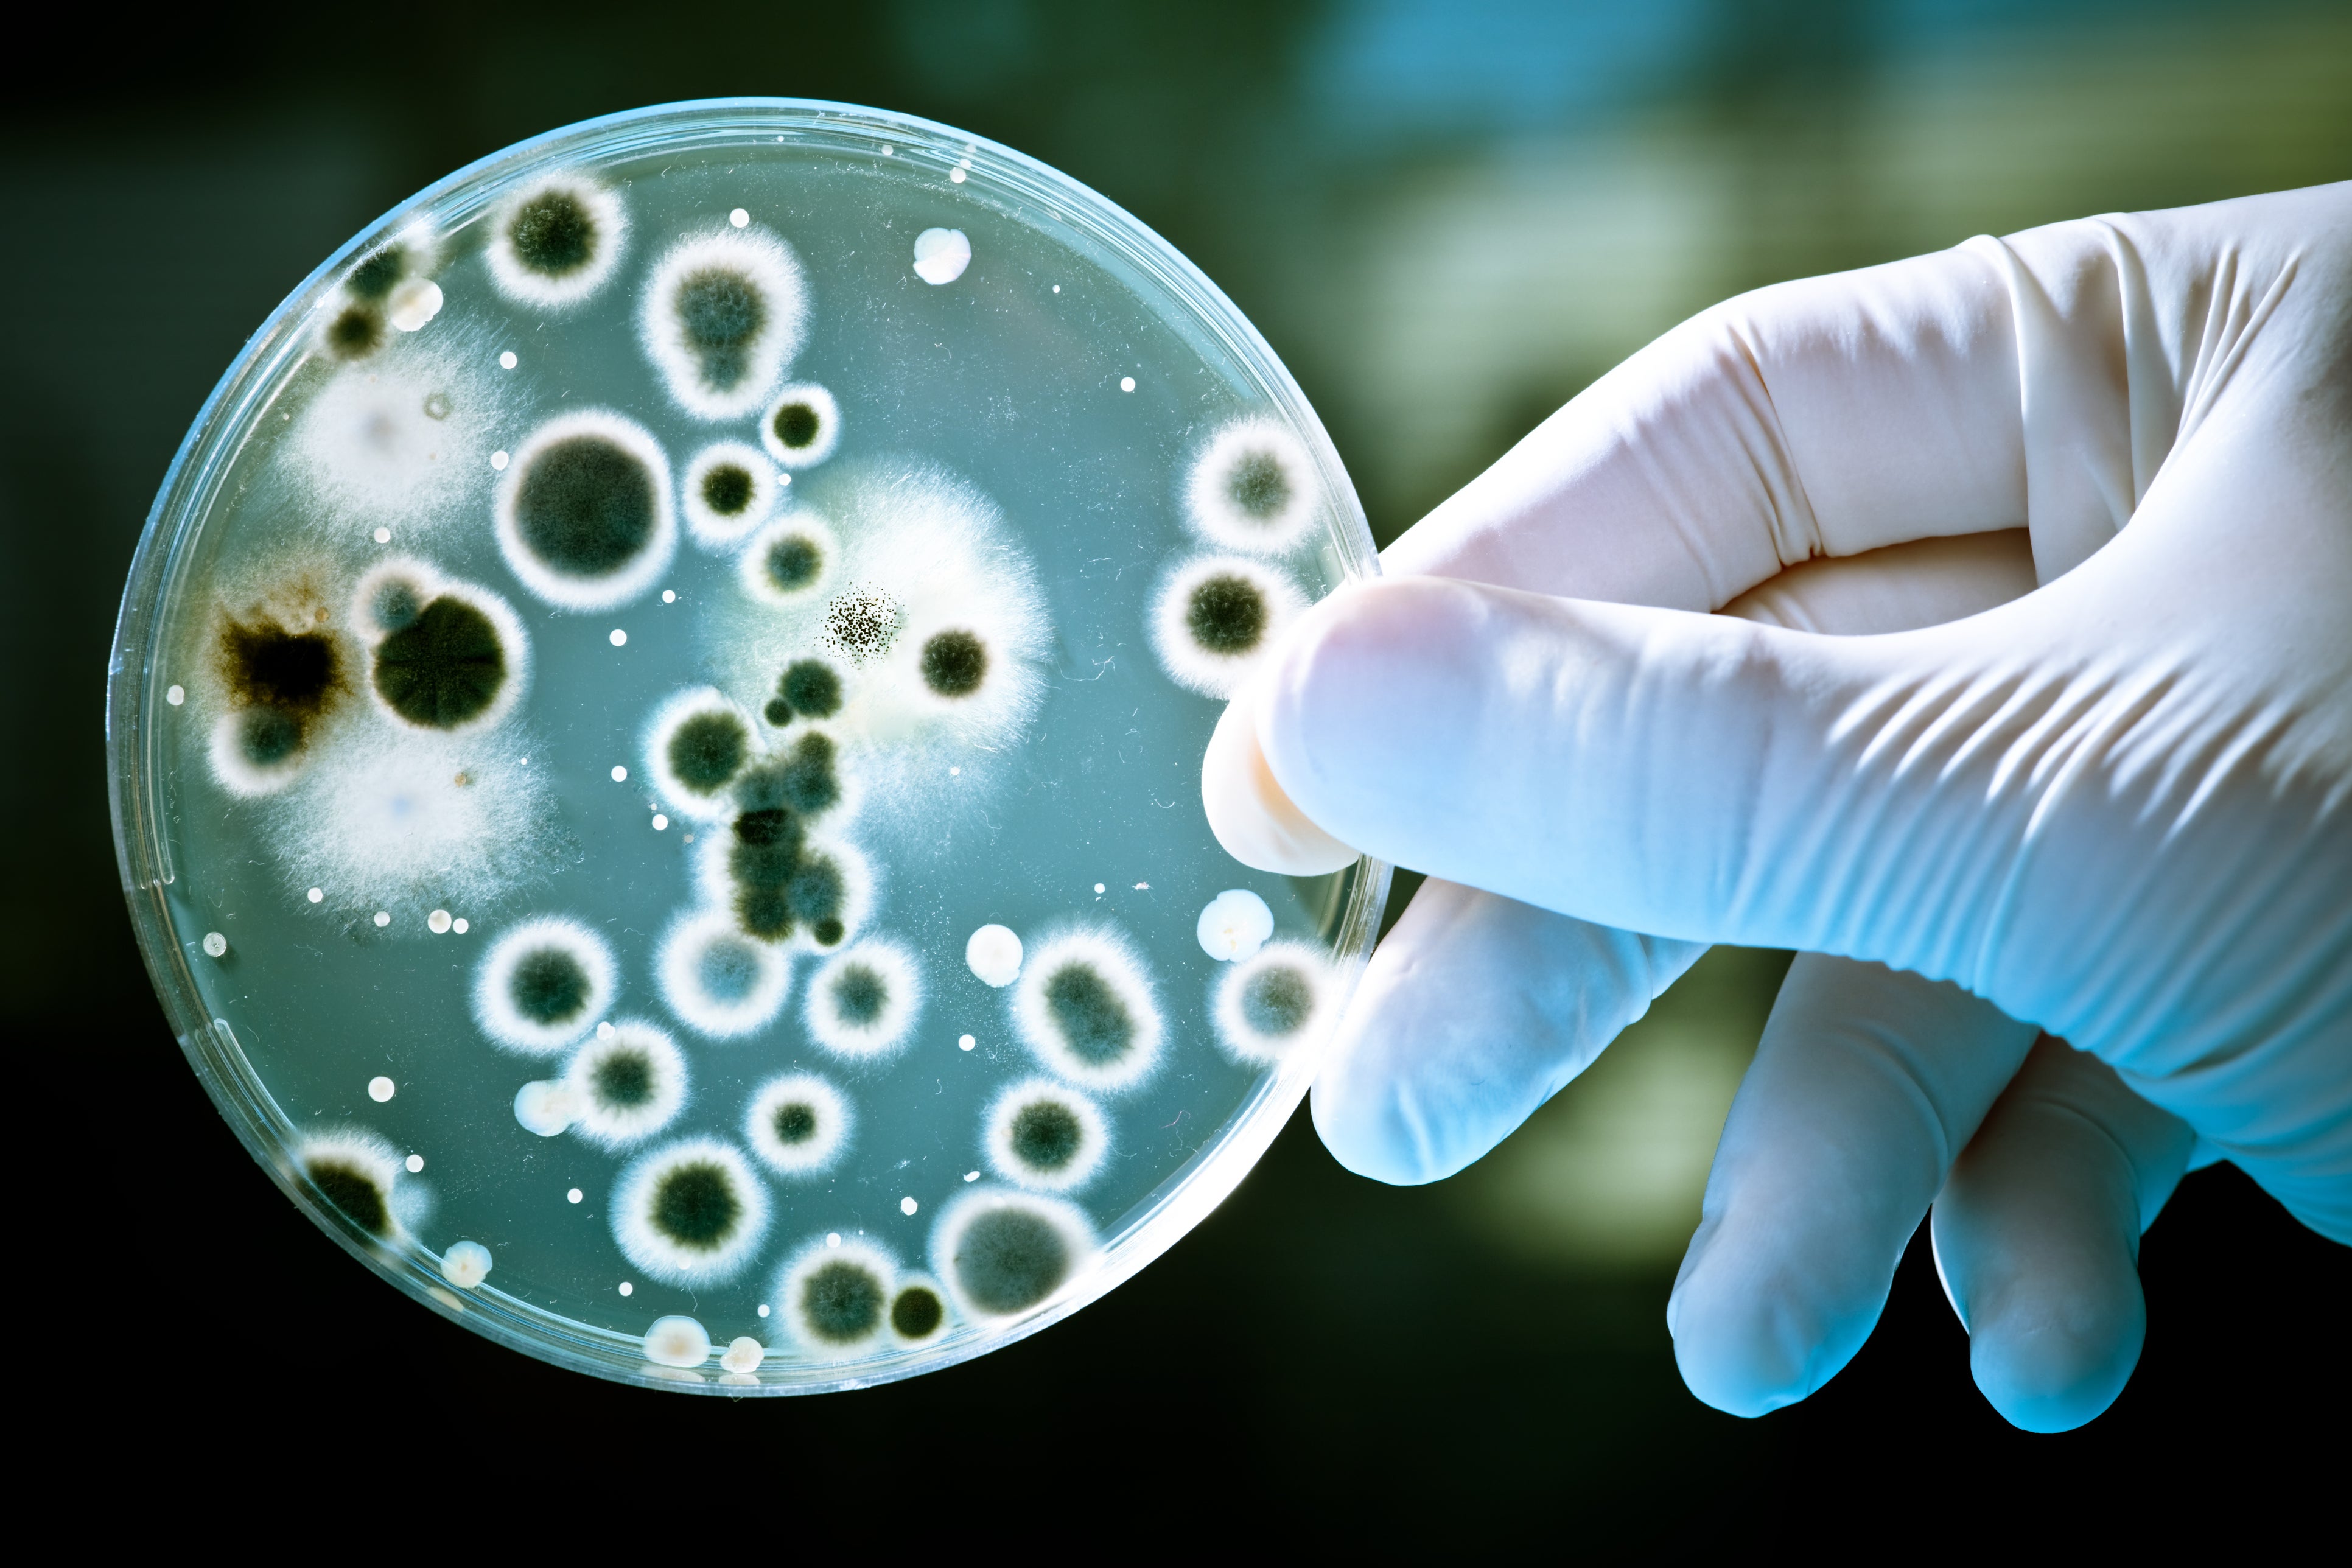 gloved hand holding biological sample in a petri dish (c) iStock